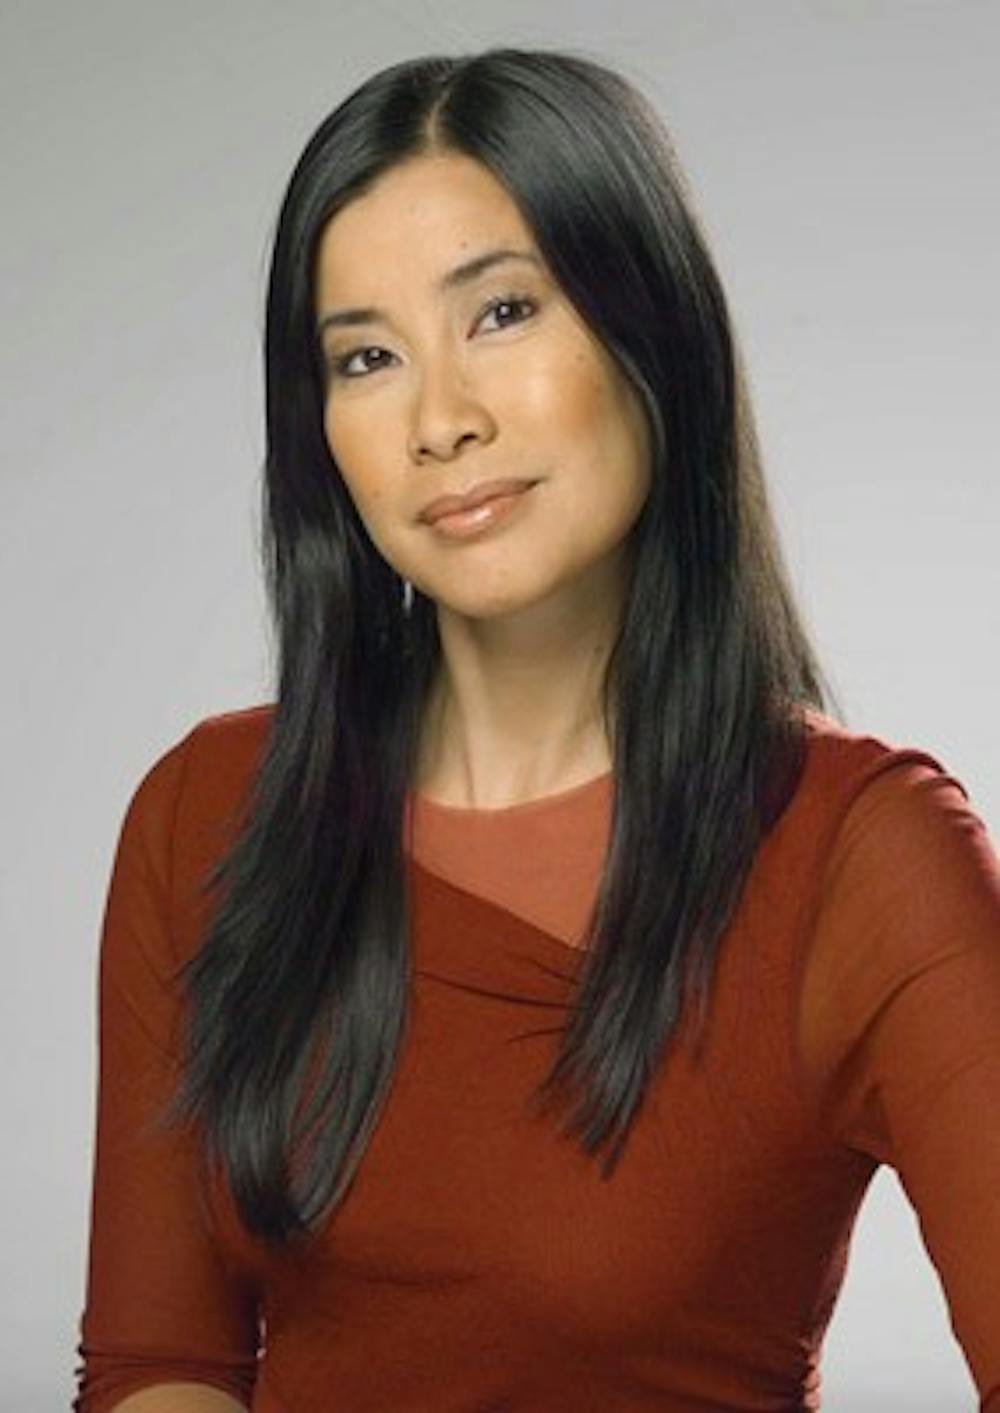 Lisa Ling, host of National Geographic Channel's "Explorer."

(c) Mark Thiessen